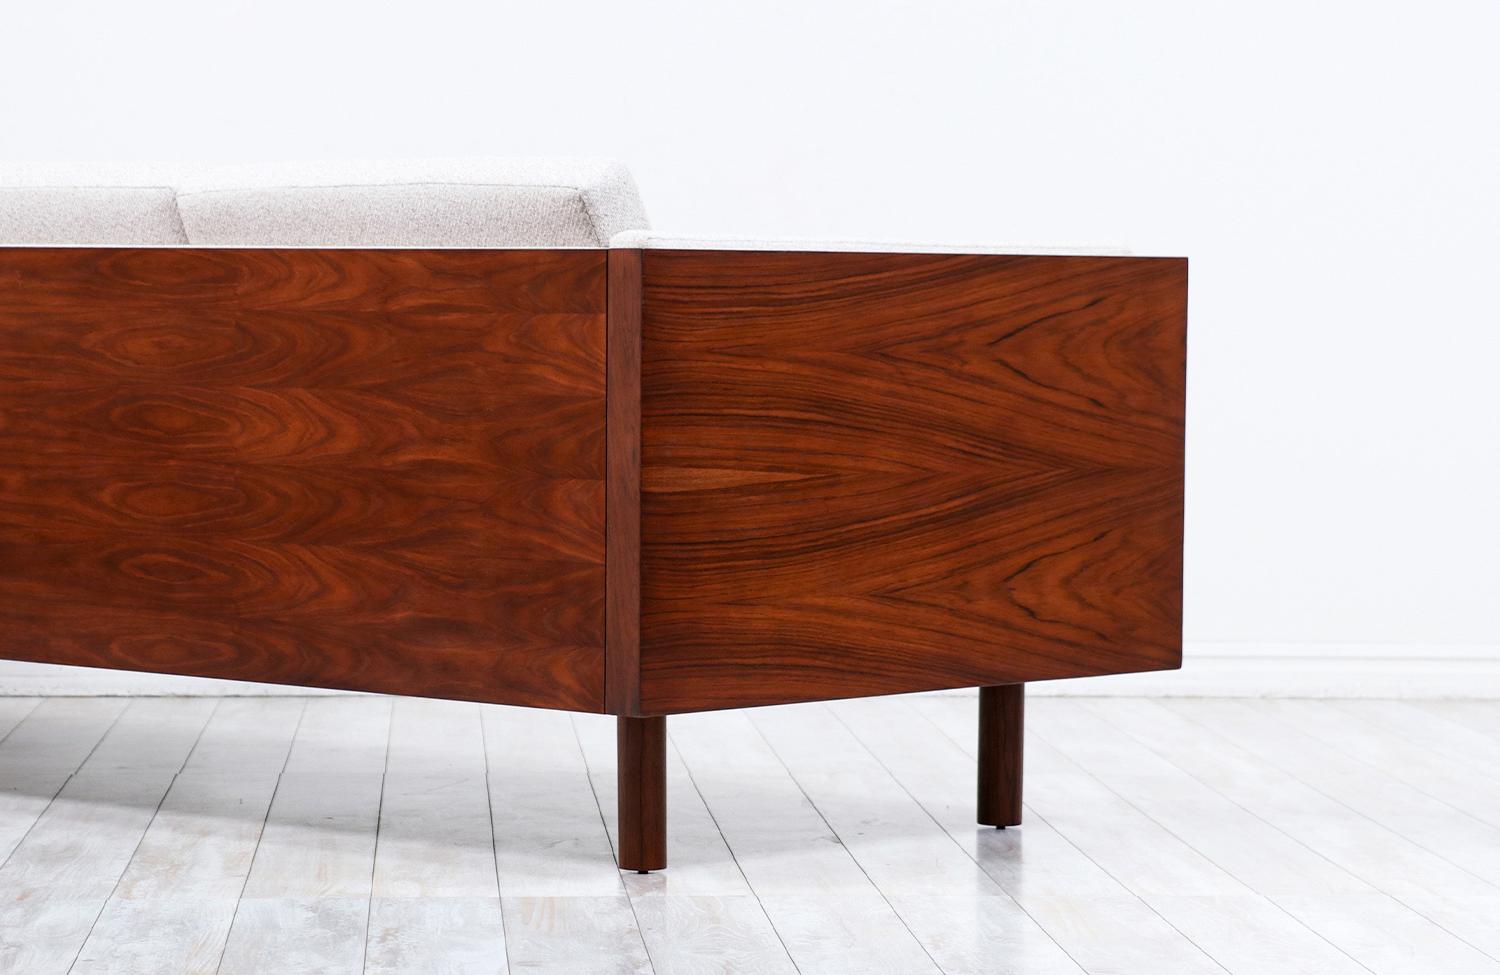  Expertly Restored - Milo Baughman Rosewood Case Sofa for Thayer Coggin In Excellent Condition For Sale In Los Angeles, CA